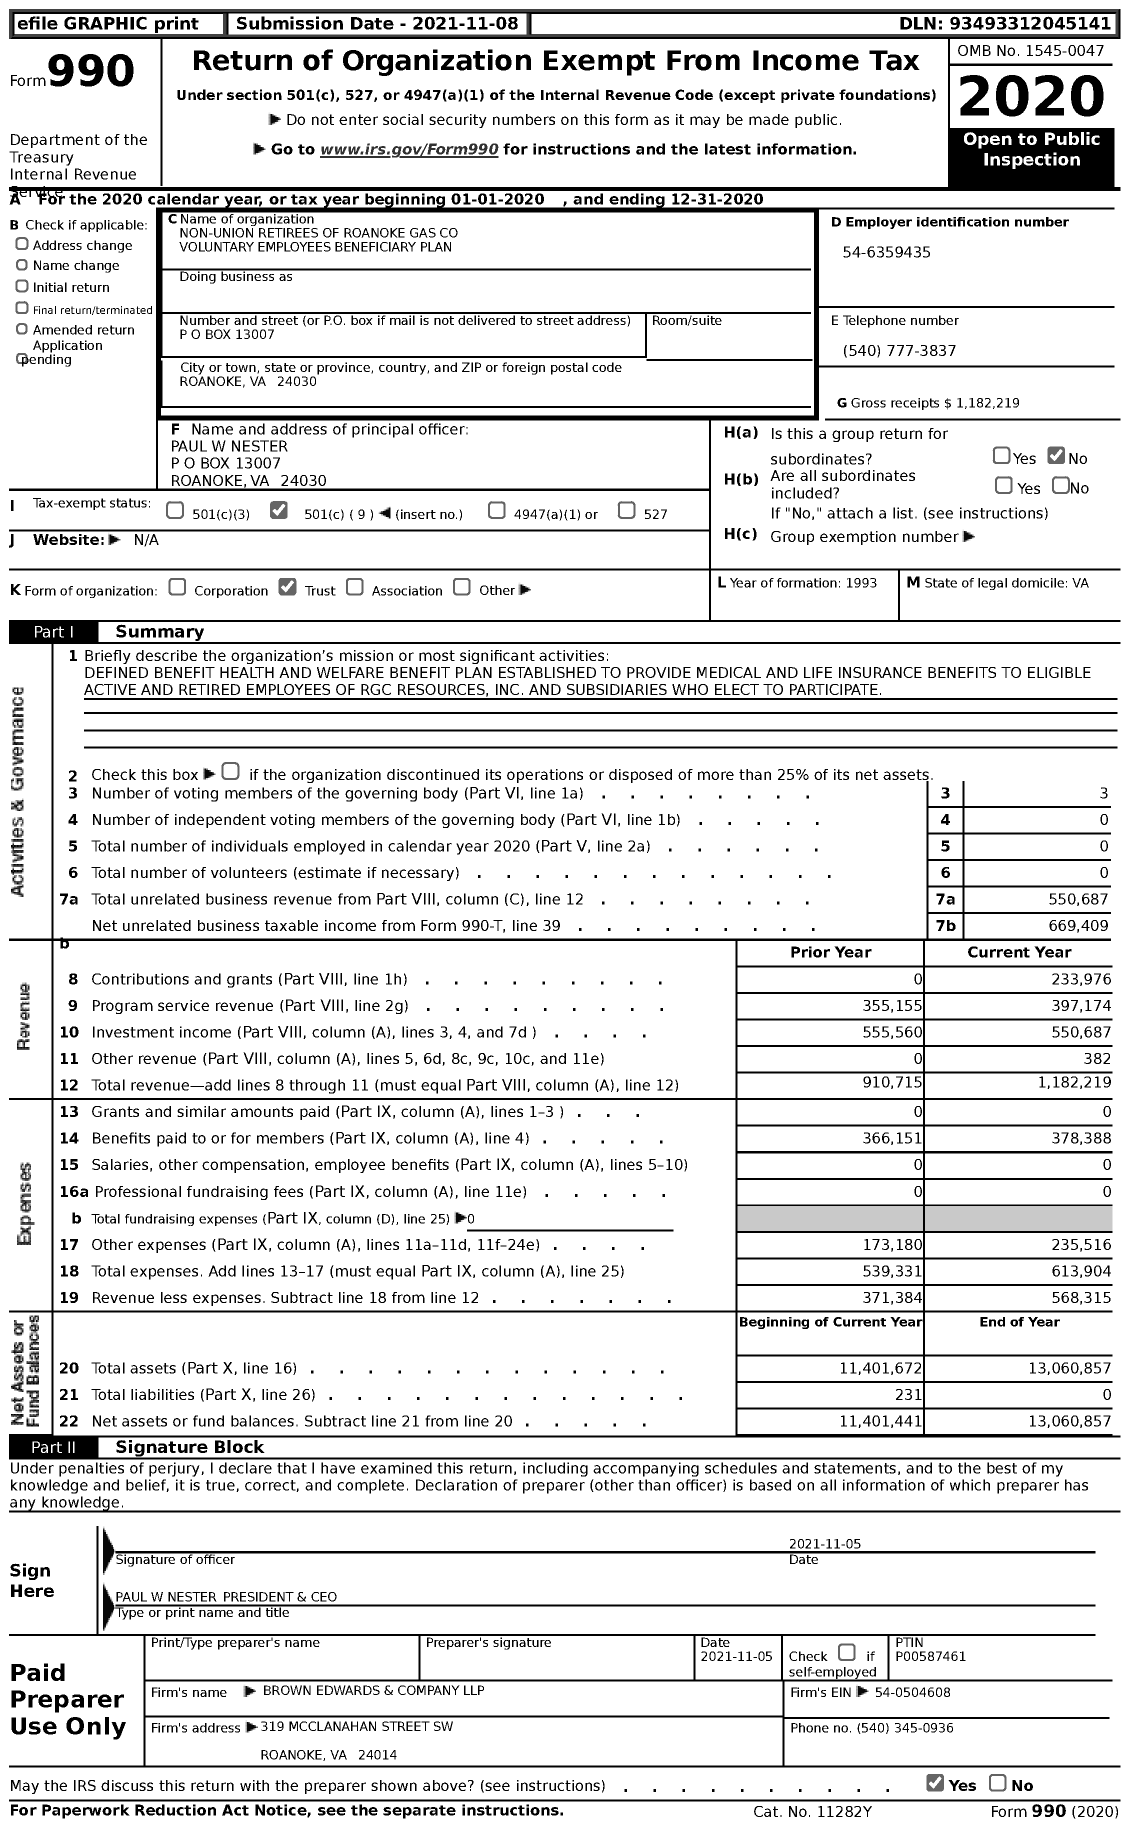 Image of first page of 2020 Form 990 for Non-Union Retirees of Roanoke Gas Voluntary Employees Beneficiary Plan